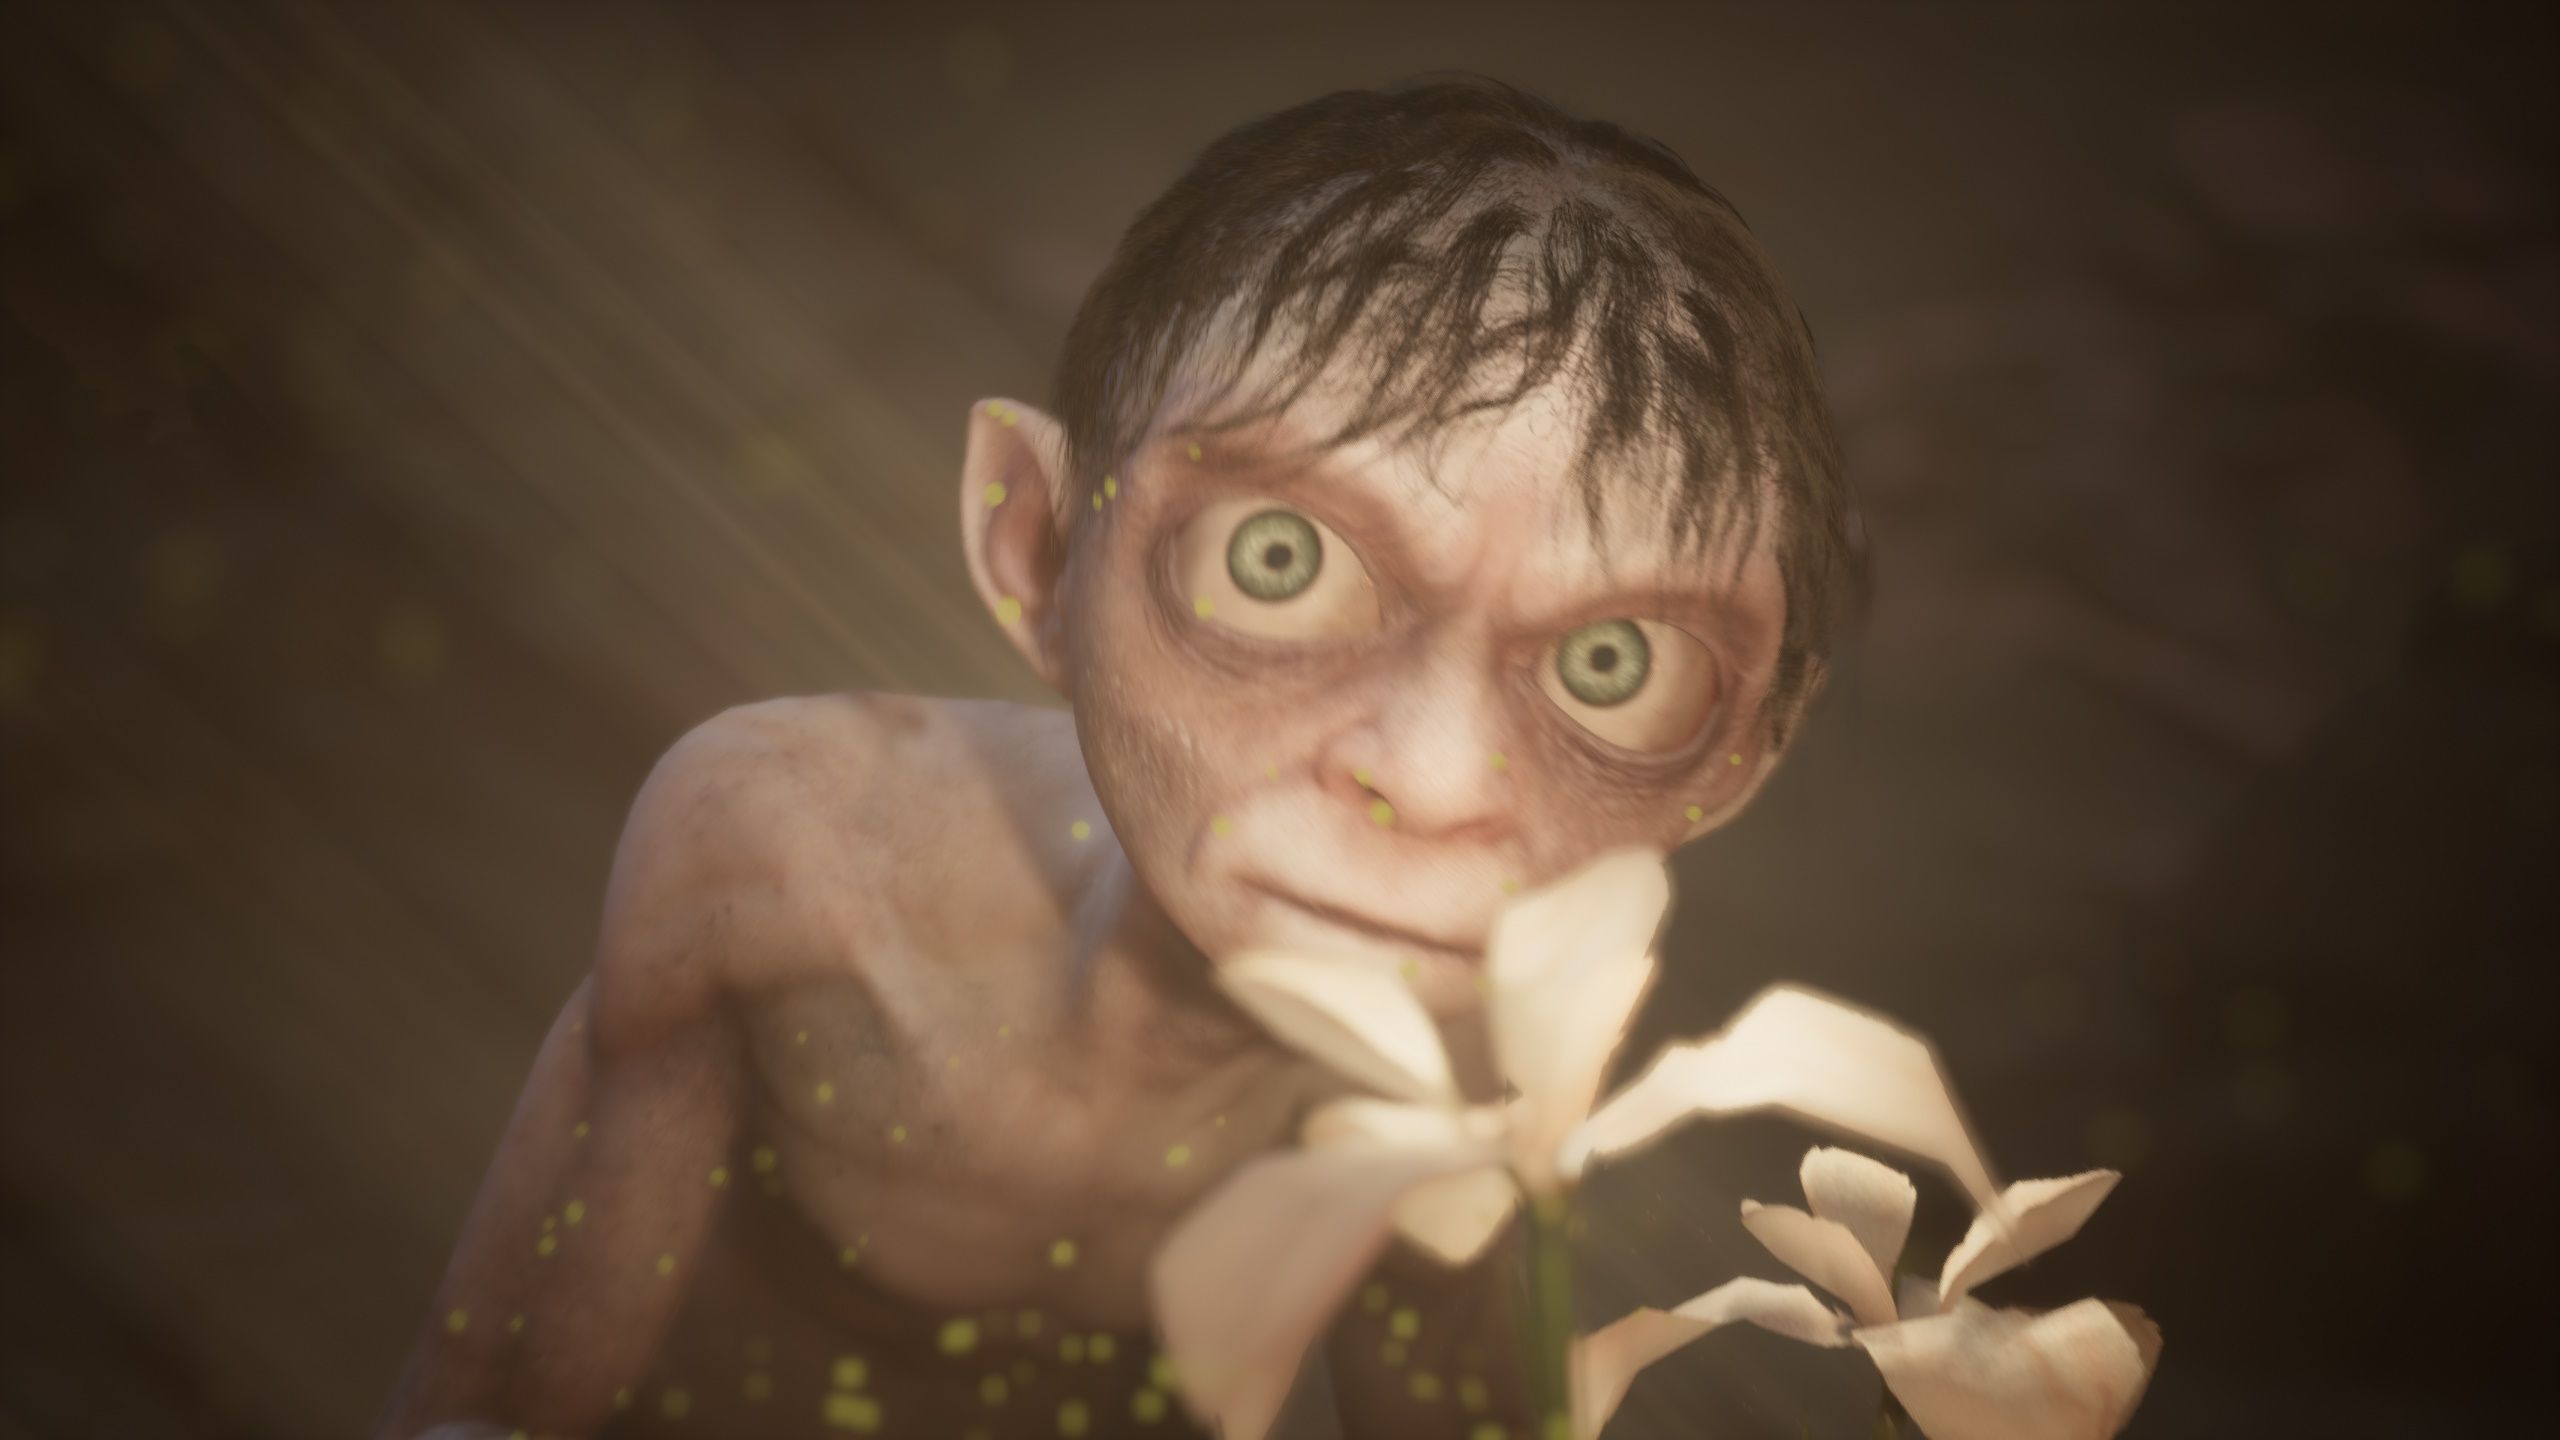 The Lord Of Ring: Gollum' Developers Apologize For The Game Being Very Bad